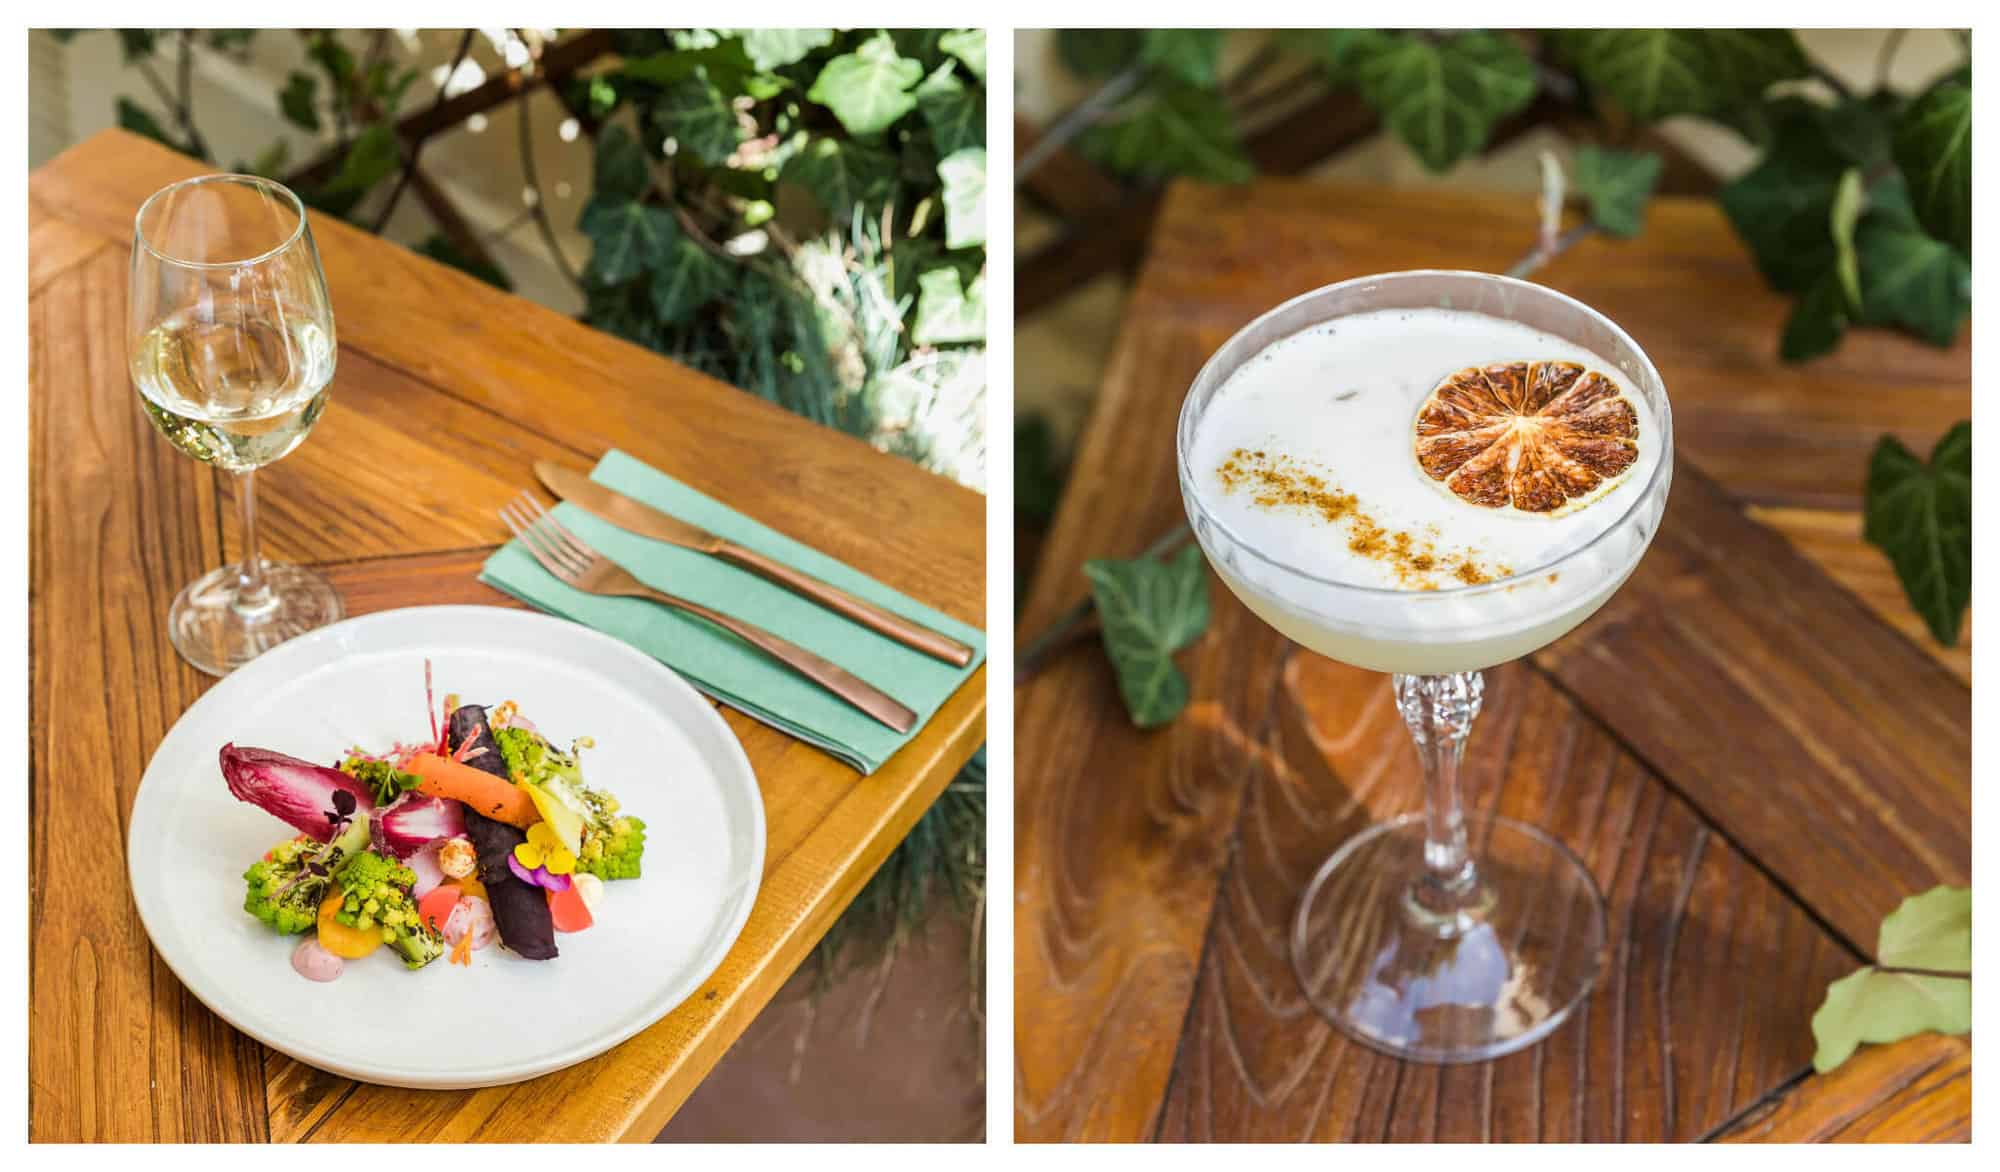 Left: A dish of vegetables from Paris's Selva on a white plate paired with a glass of white wine. Right: A margarita drink in a goblet, garnished with dried orange bitter.